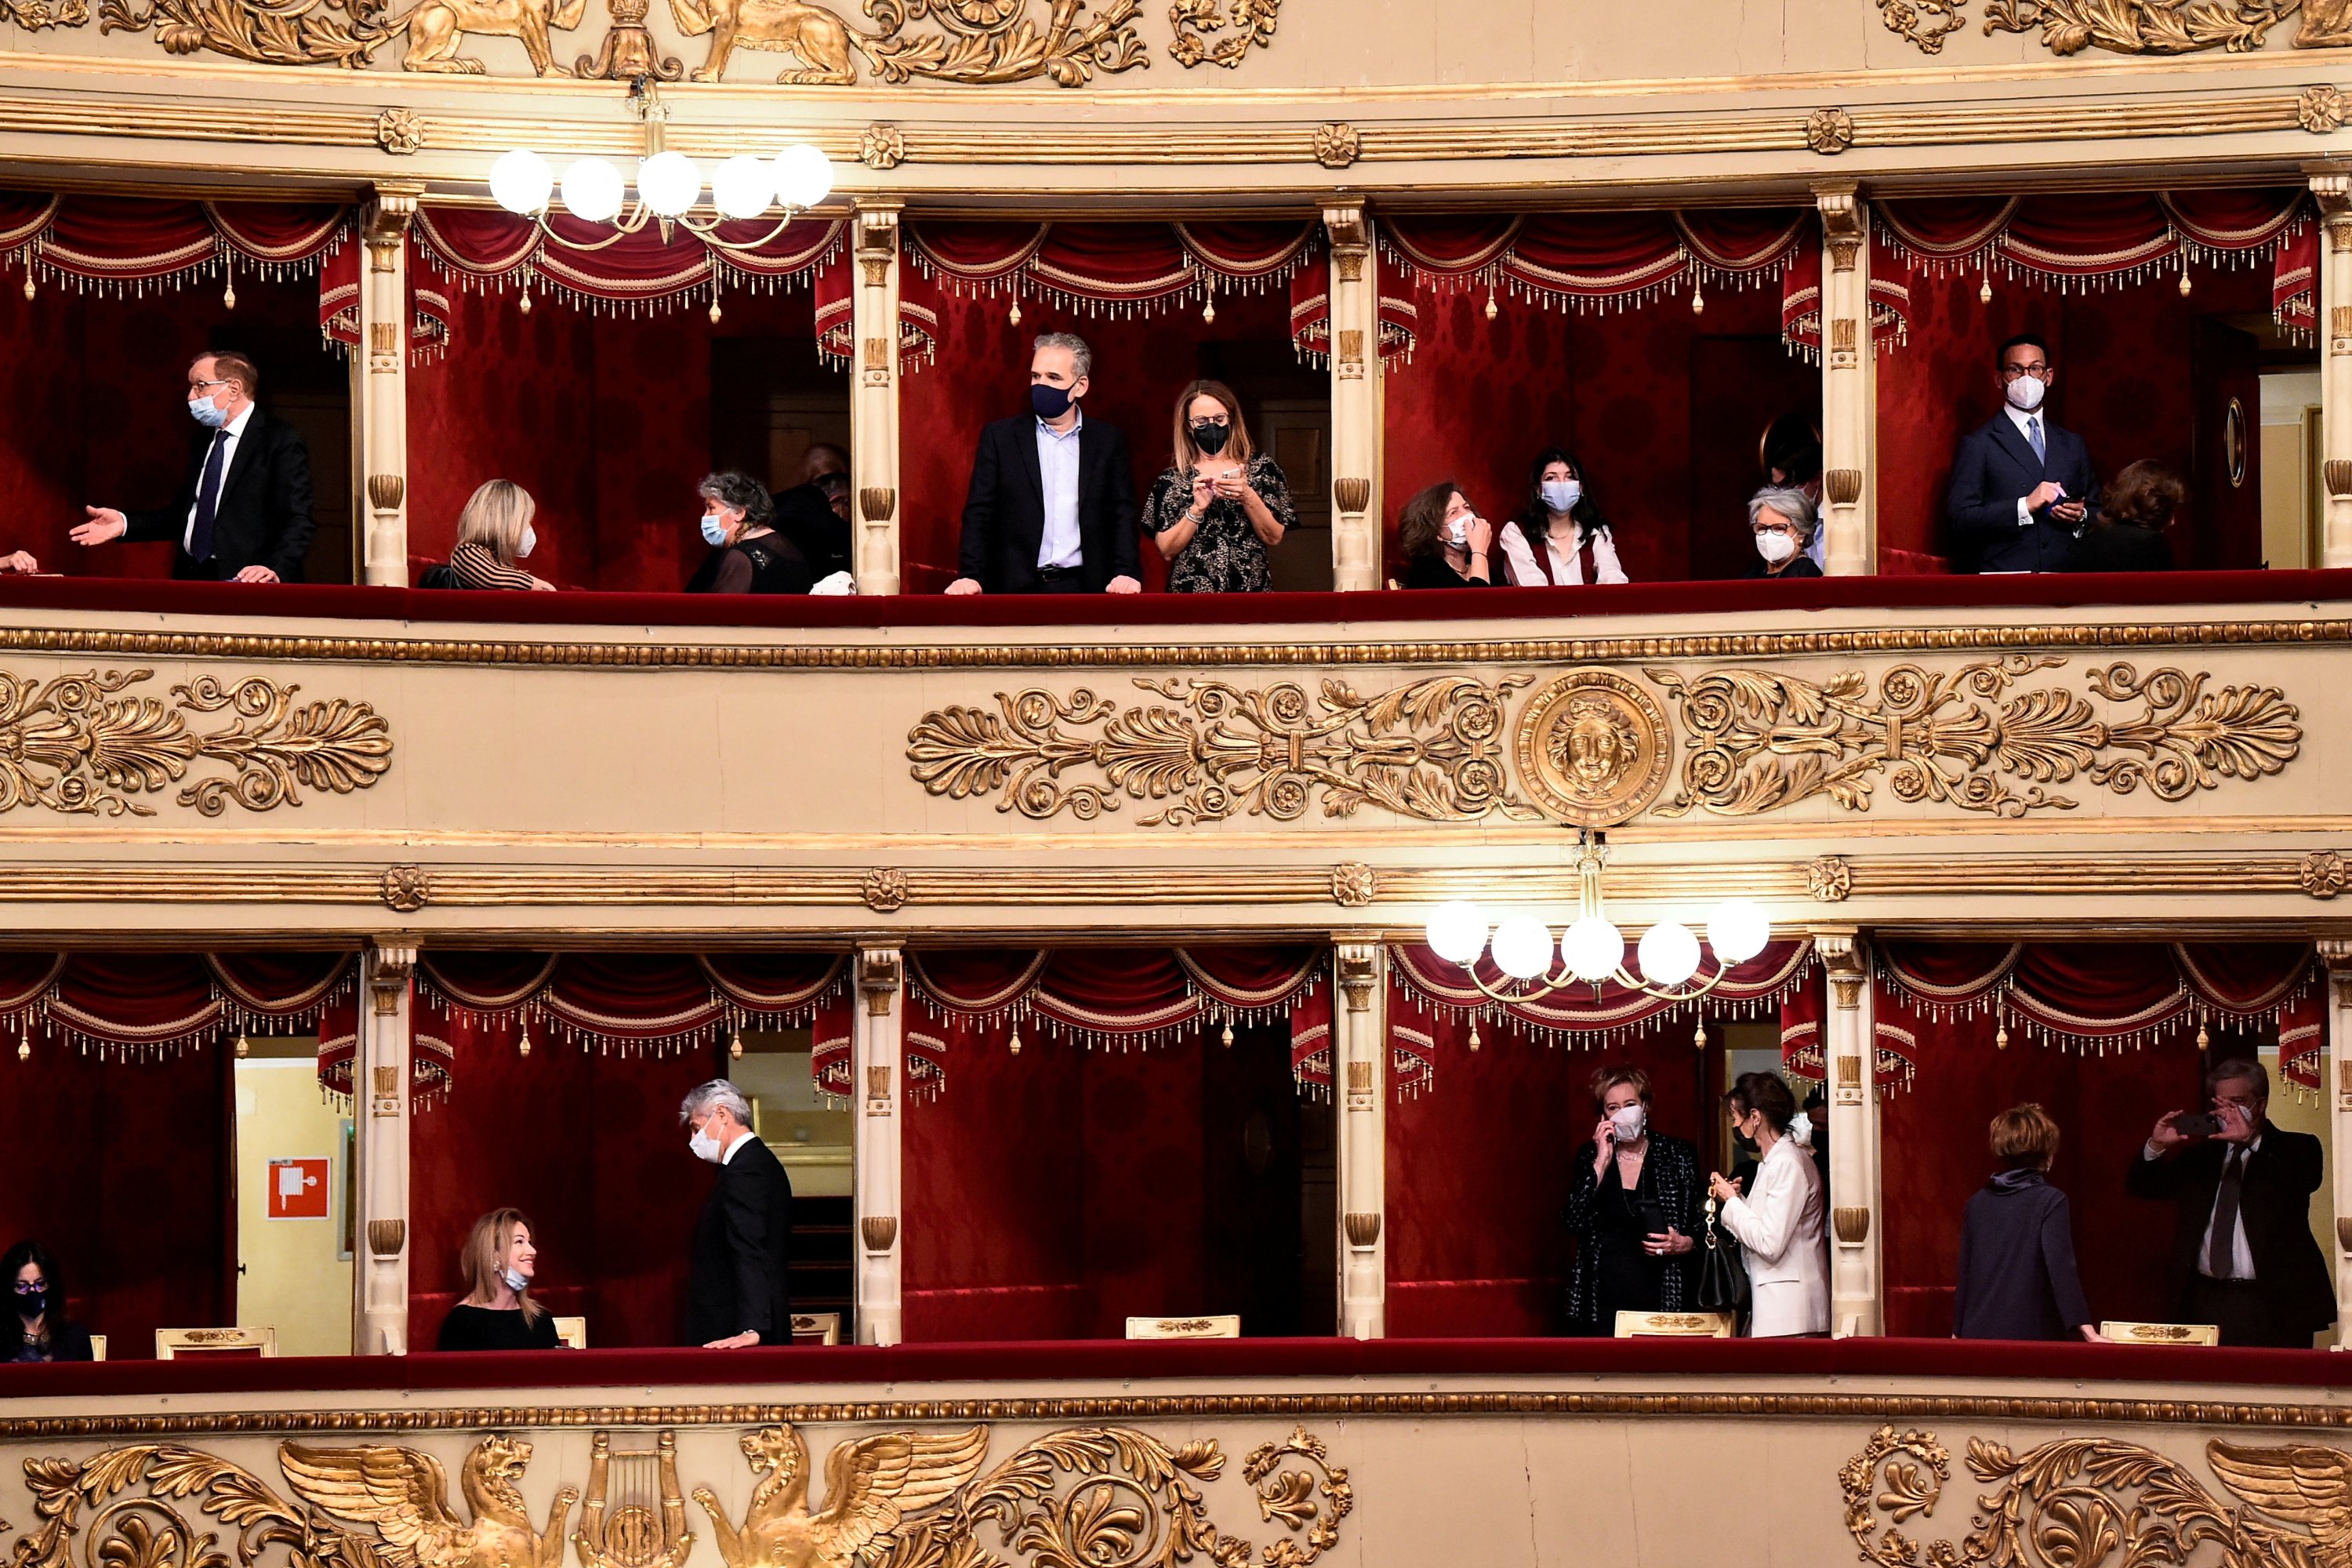 People attend the reopening of La Scala opera house after it was closed due to the coronavirus pandemic, in Milan, Italy, May 10, 2021. (Reuters Photo)